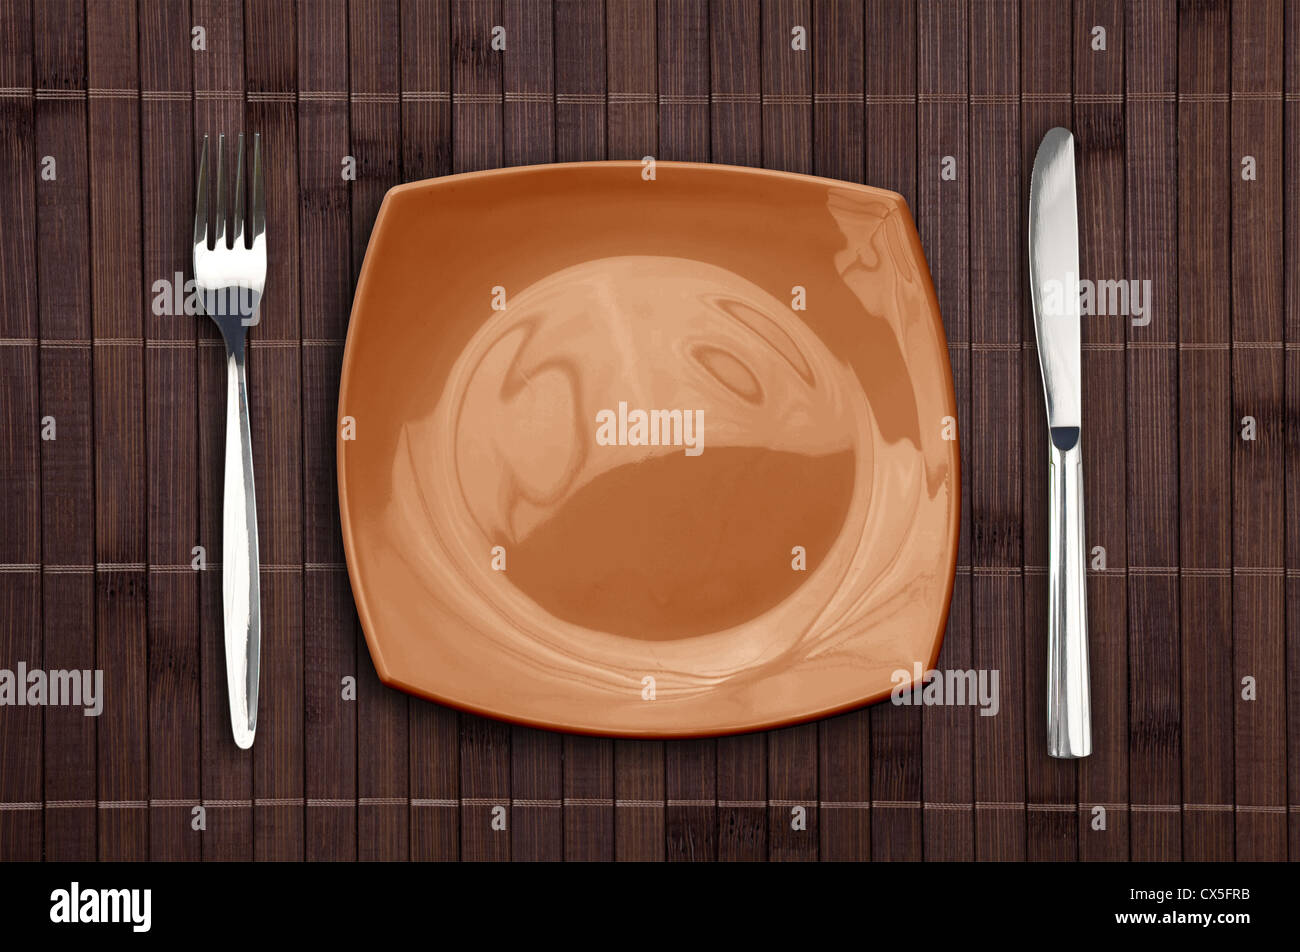 Bamboo placemat with square plate fork and knife Stock Photo